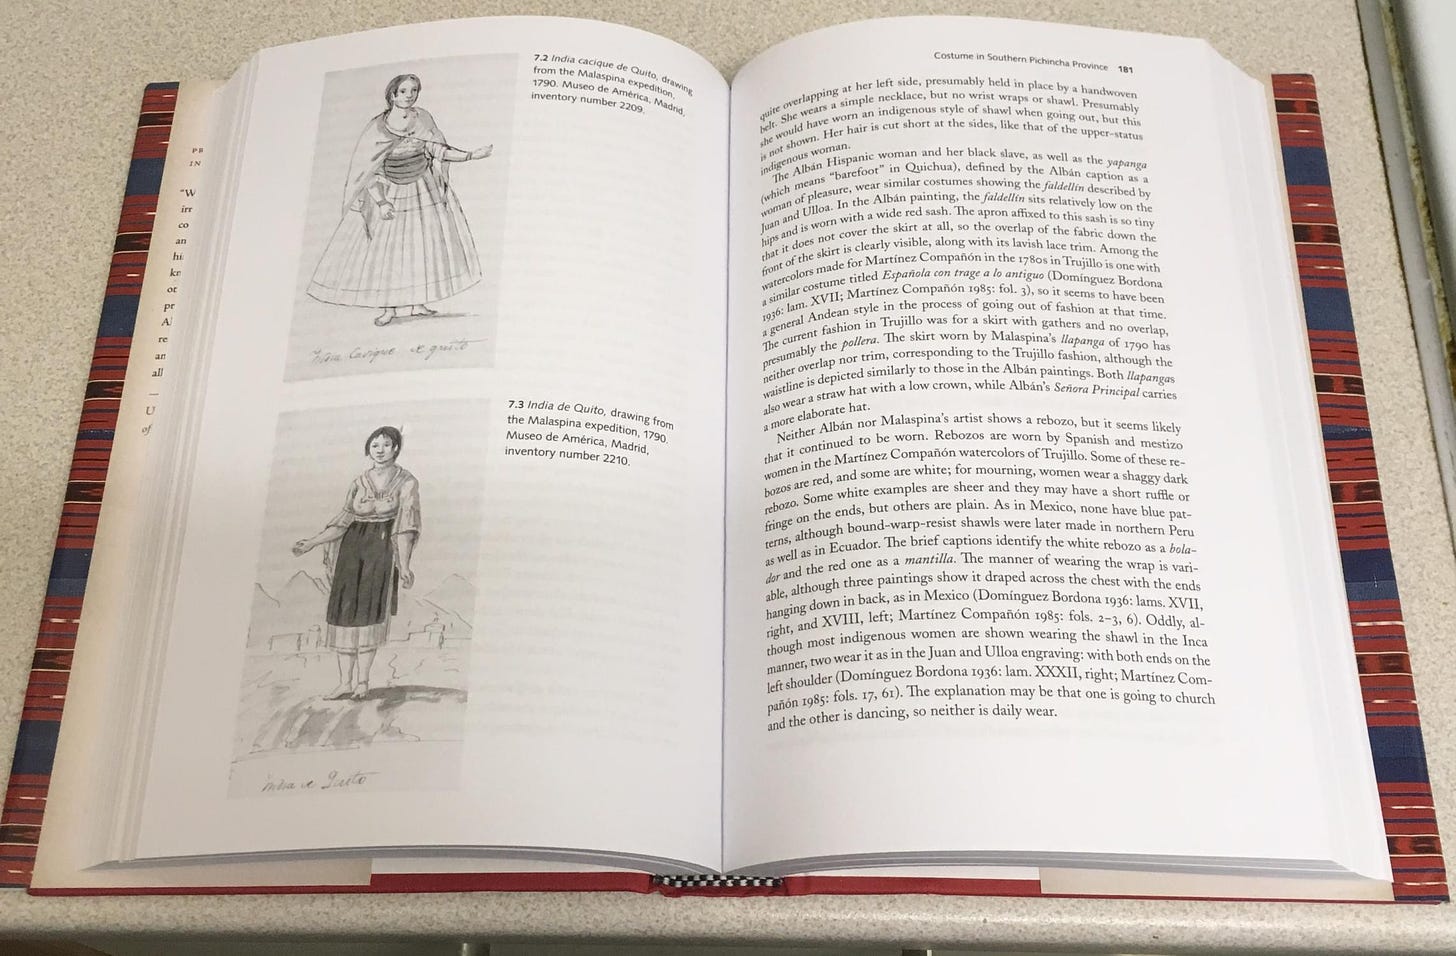 Page spread from Costume and History in Highland Ecuador, edited by Ann Pollard Rowe (2011).